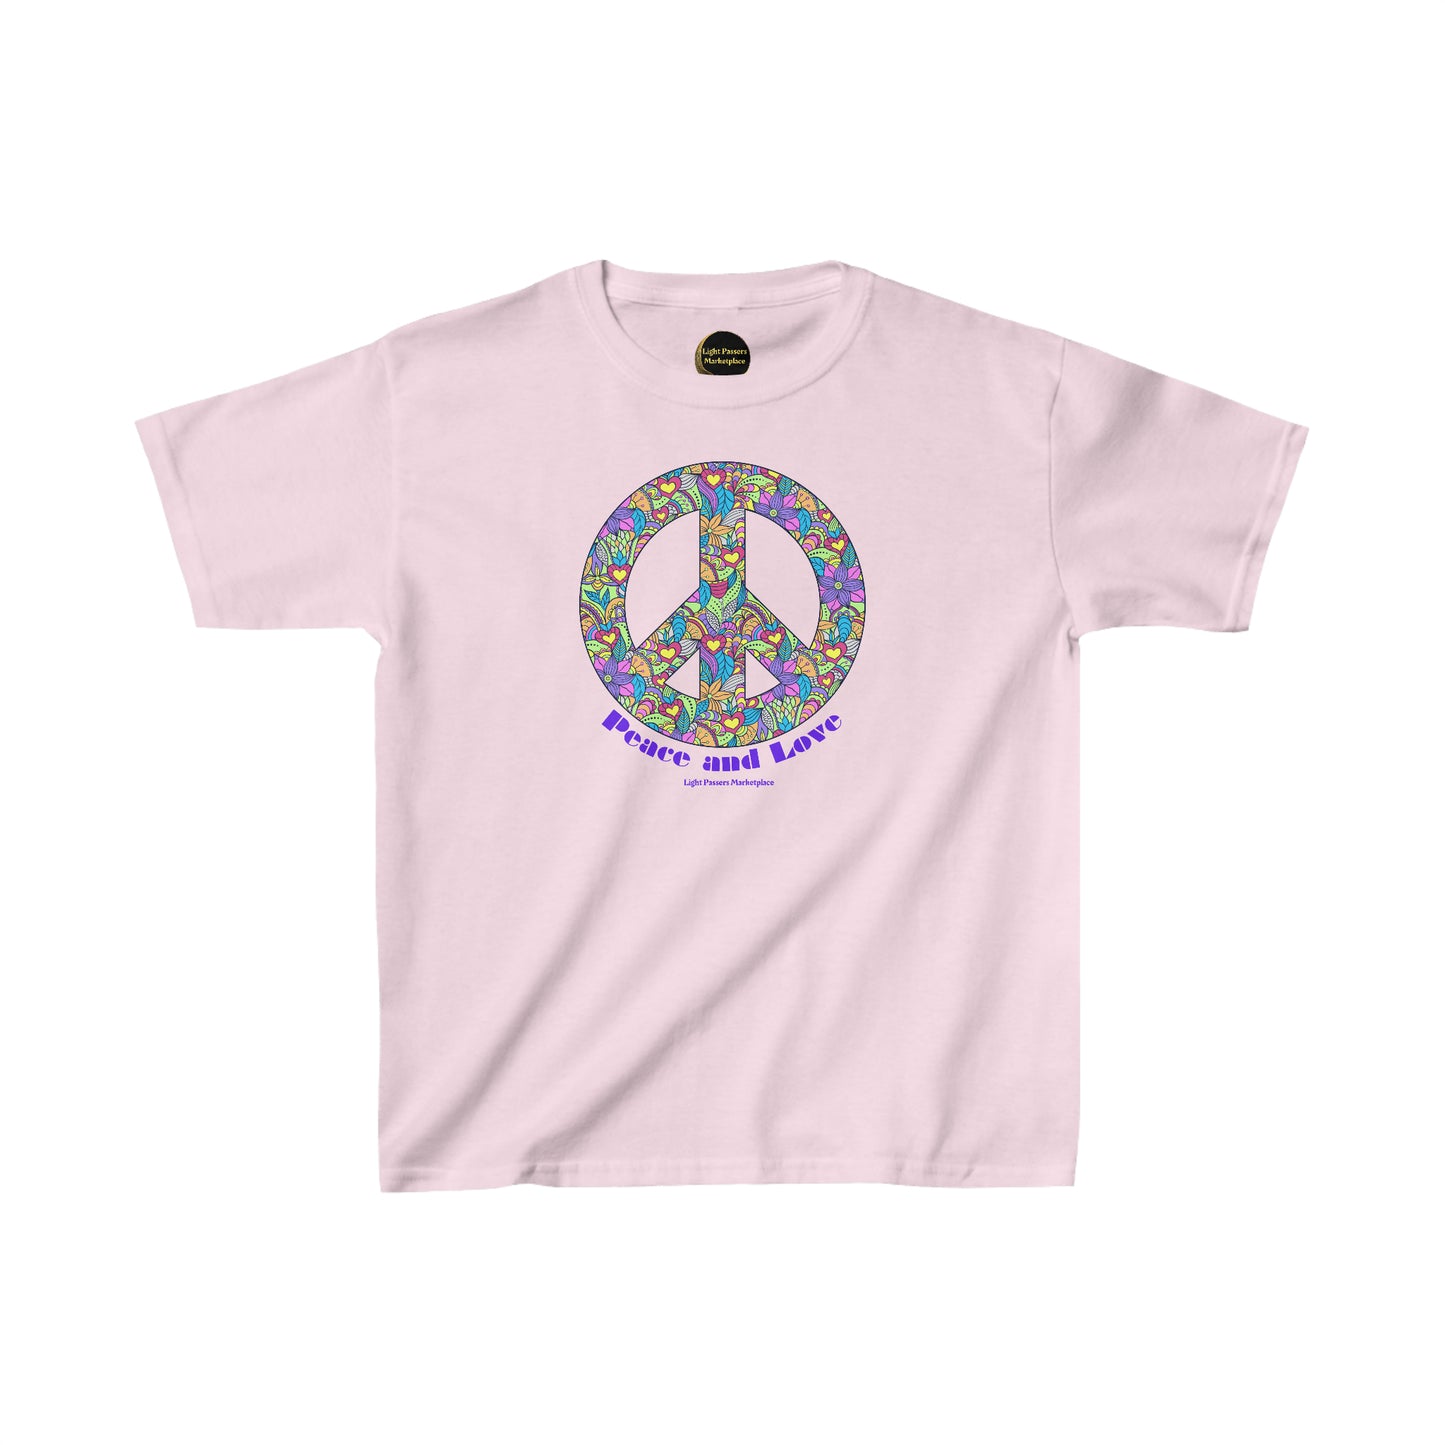 Light Passers Marketplace Flower Peace Sign Youth Cotton T-shirt Simple Messages, Mental Health